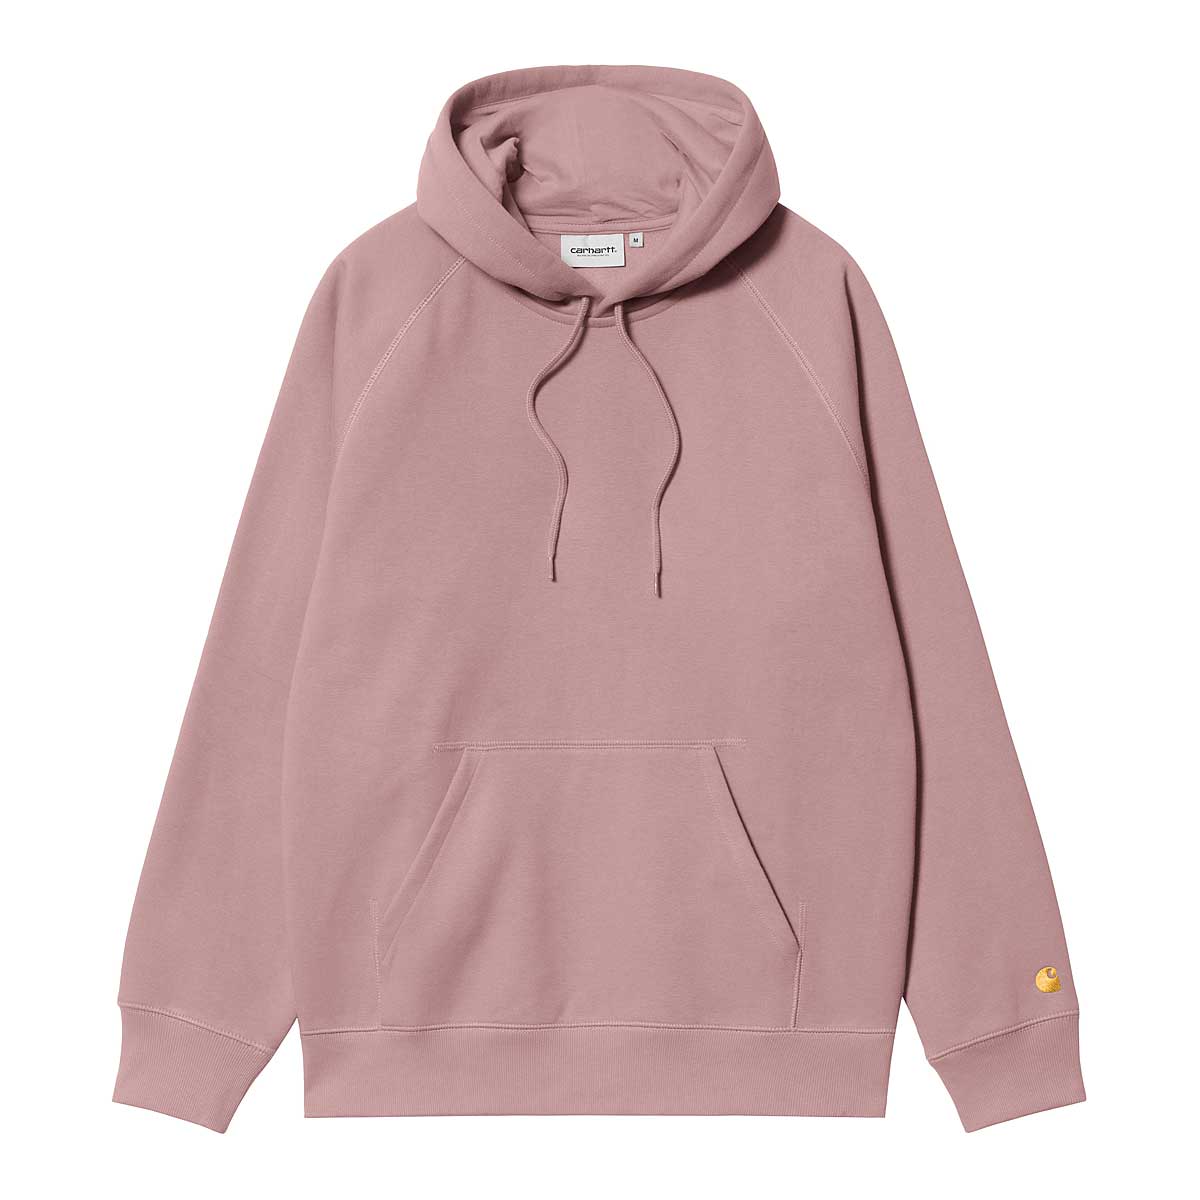 Carhartt Wip Hooded Chase Sweat, Pink/gold M